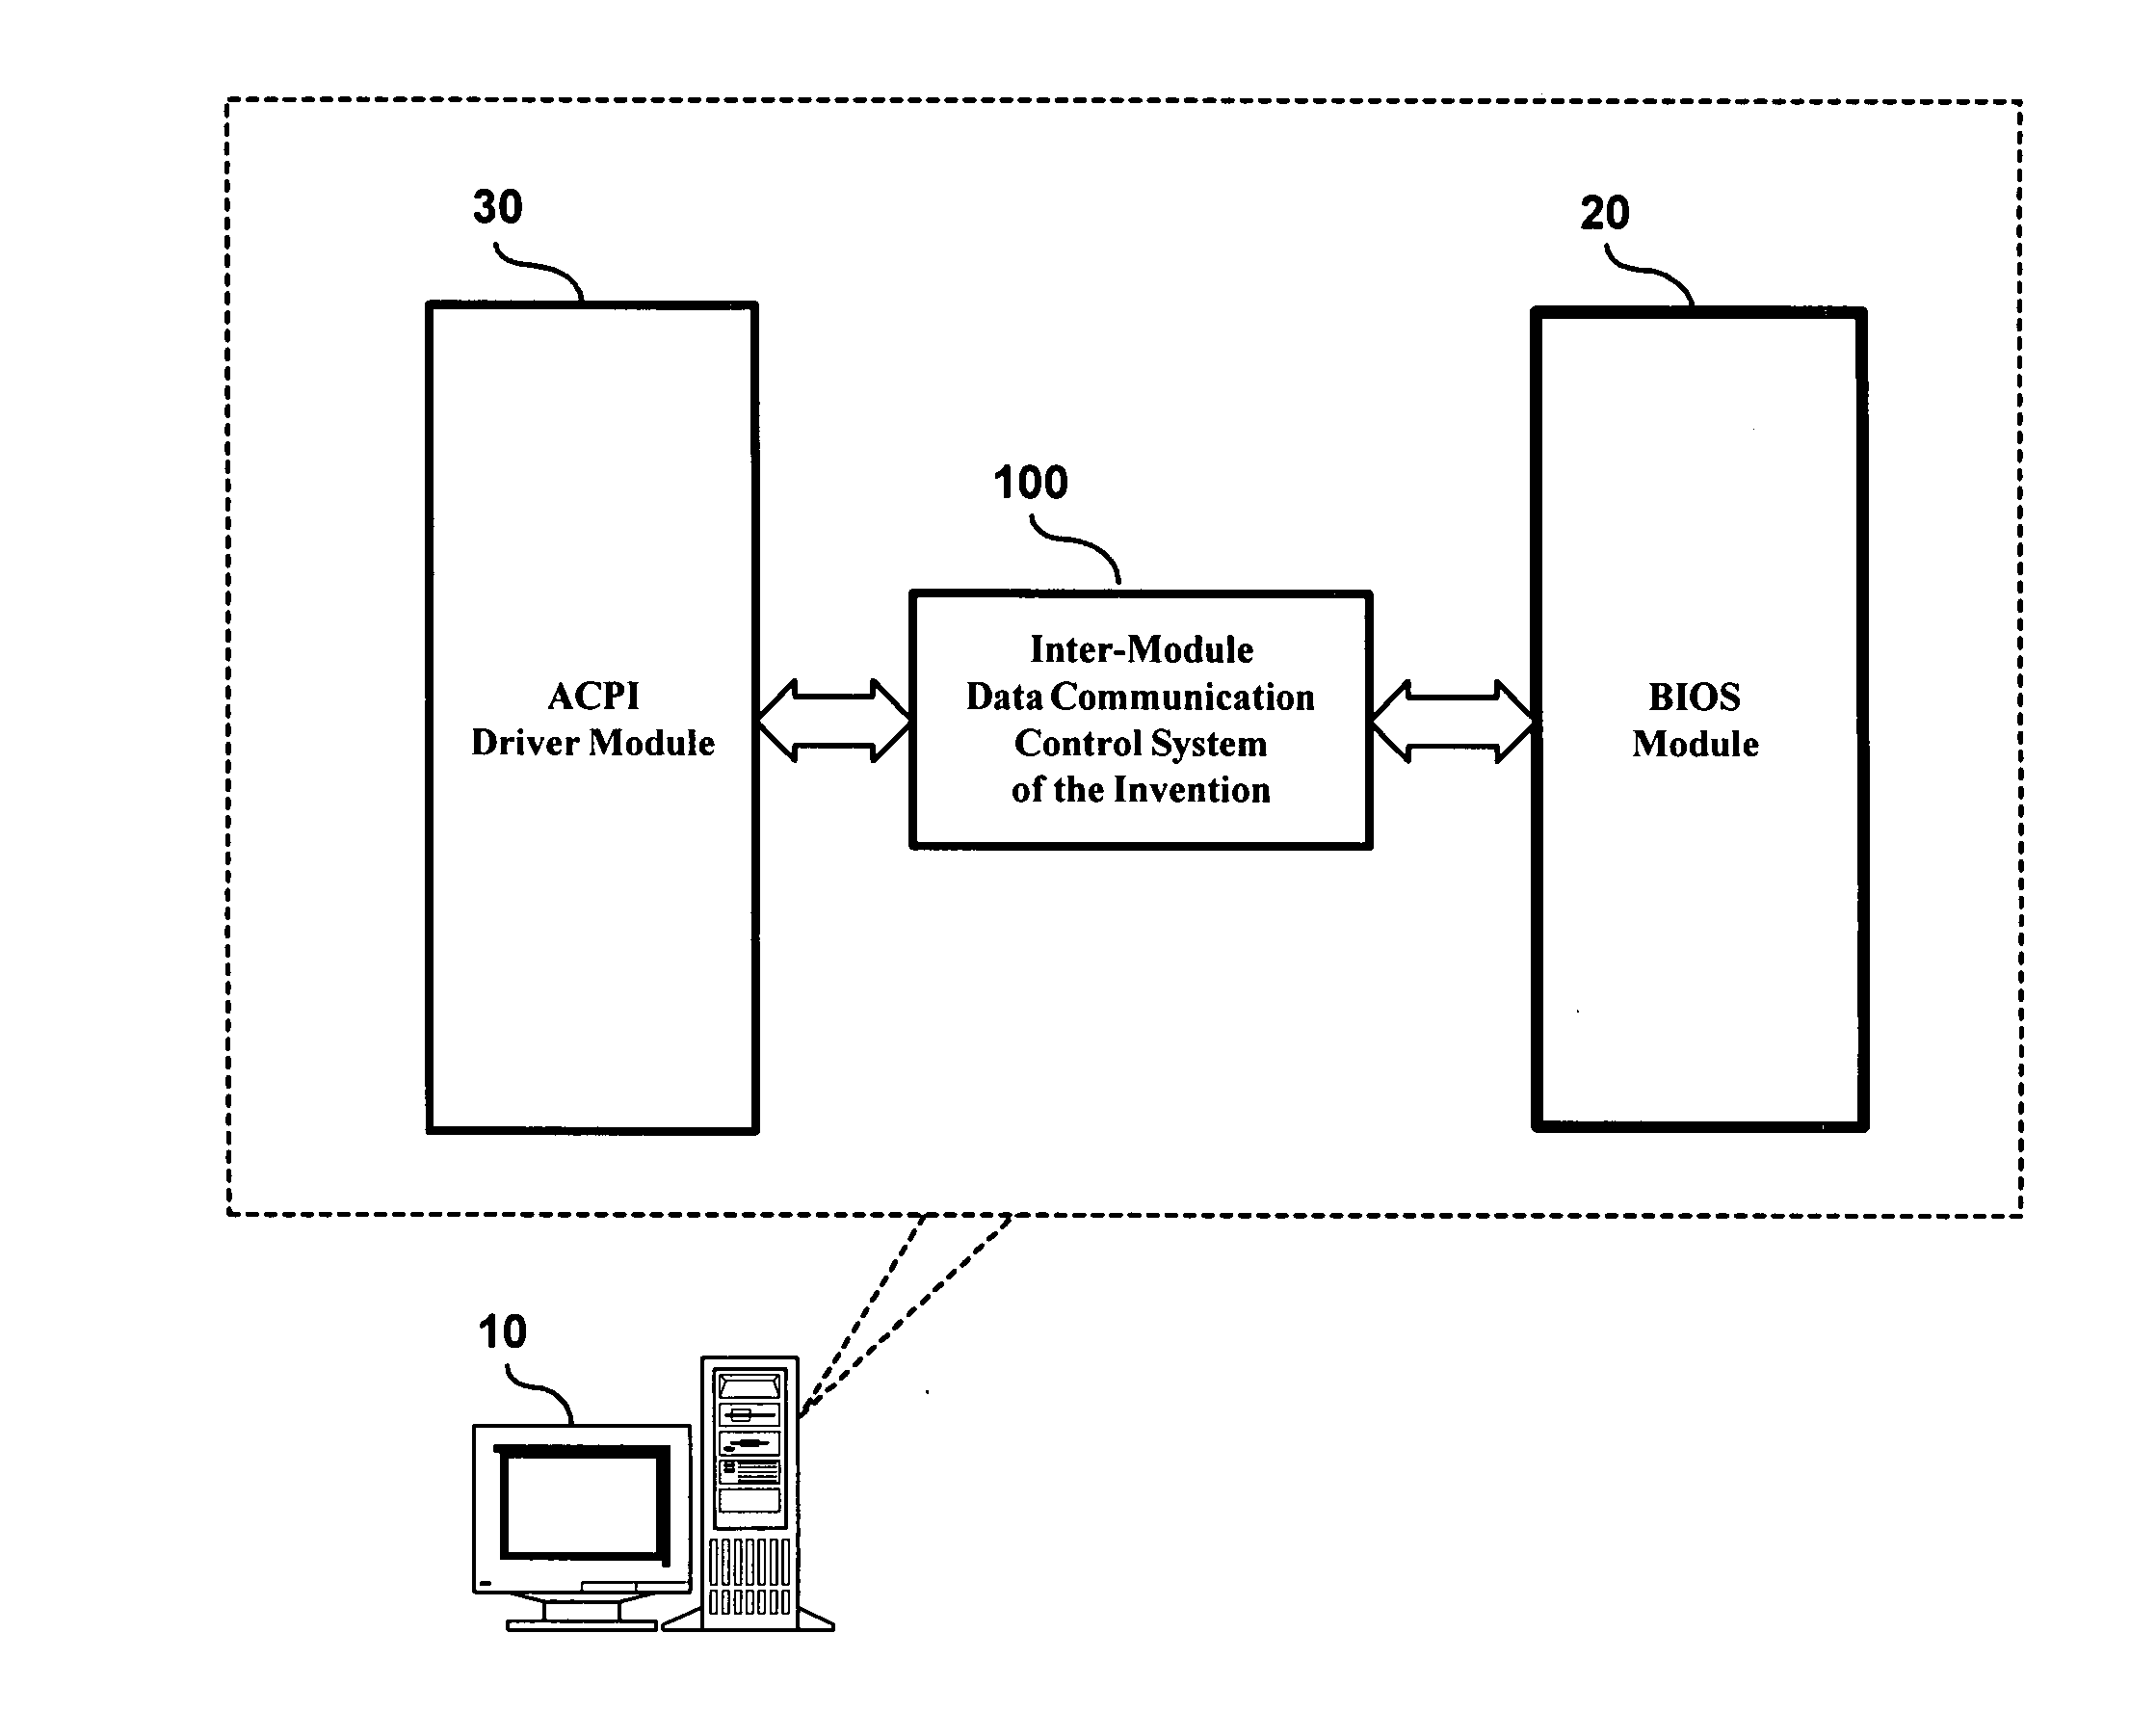 Inter-module data communication control method and system for ACPI and BIOS